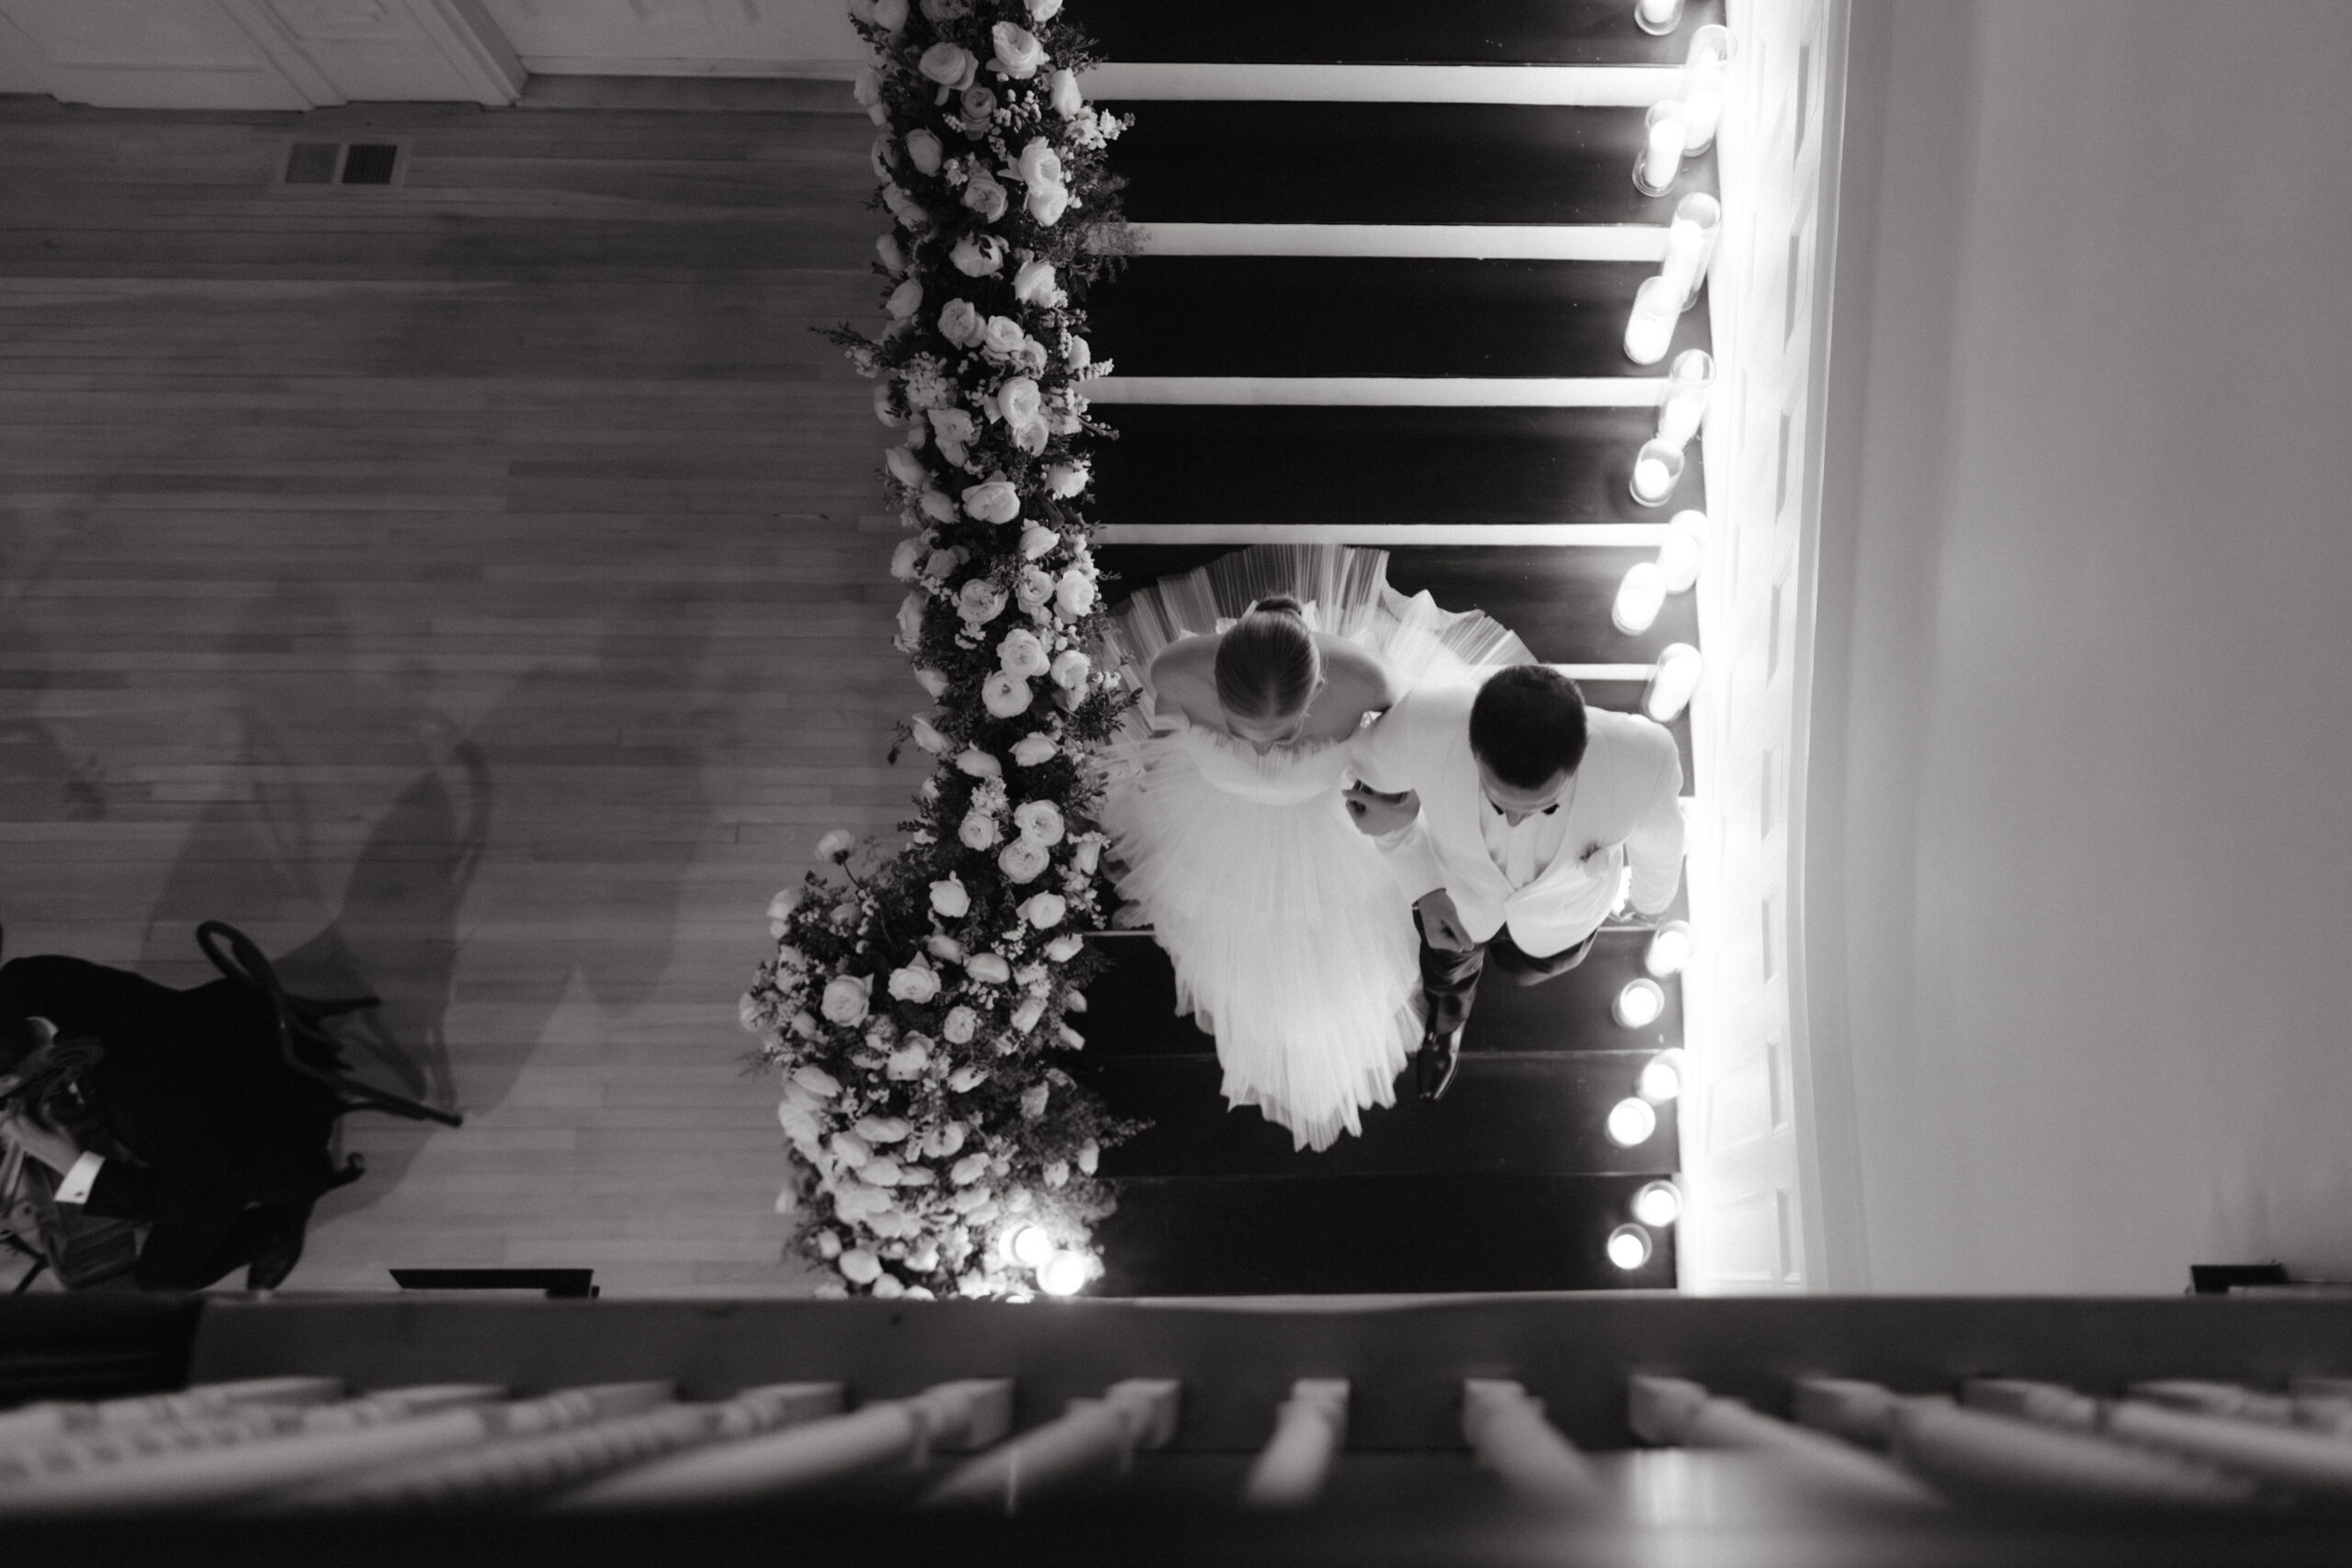 Black and white top view photo of the bride and groom walking down the stairs. Wedding photography wish list photo by Jenny Fu Studio